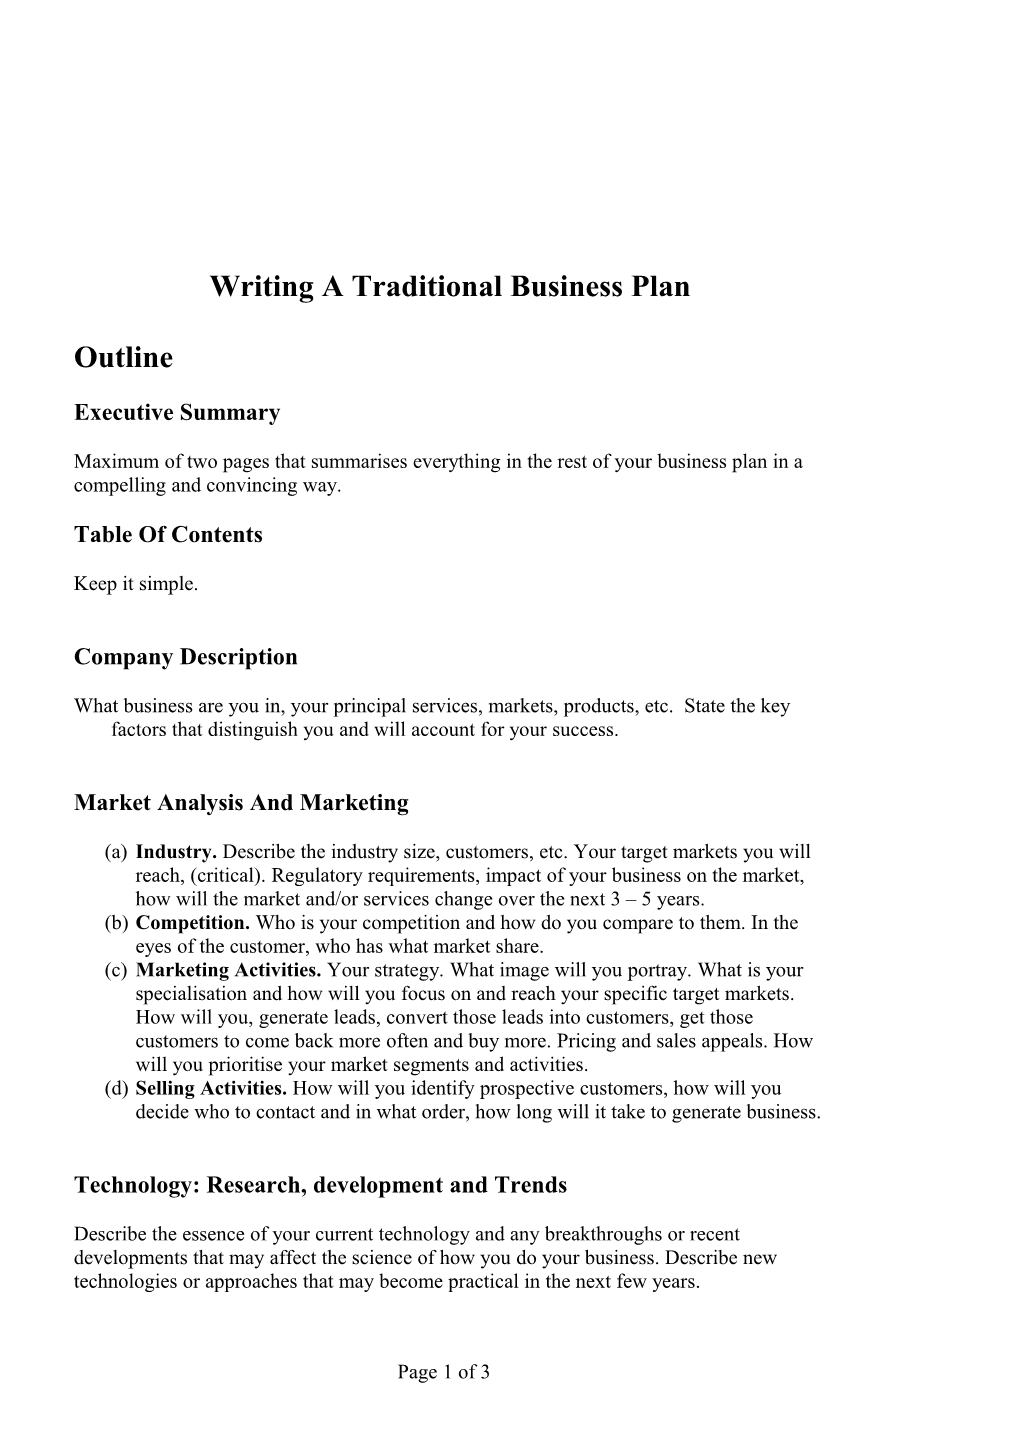 Writing a Traditional Business Plan